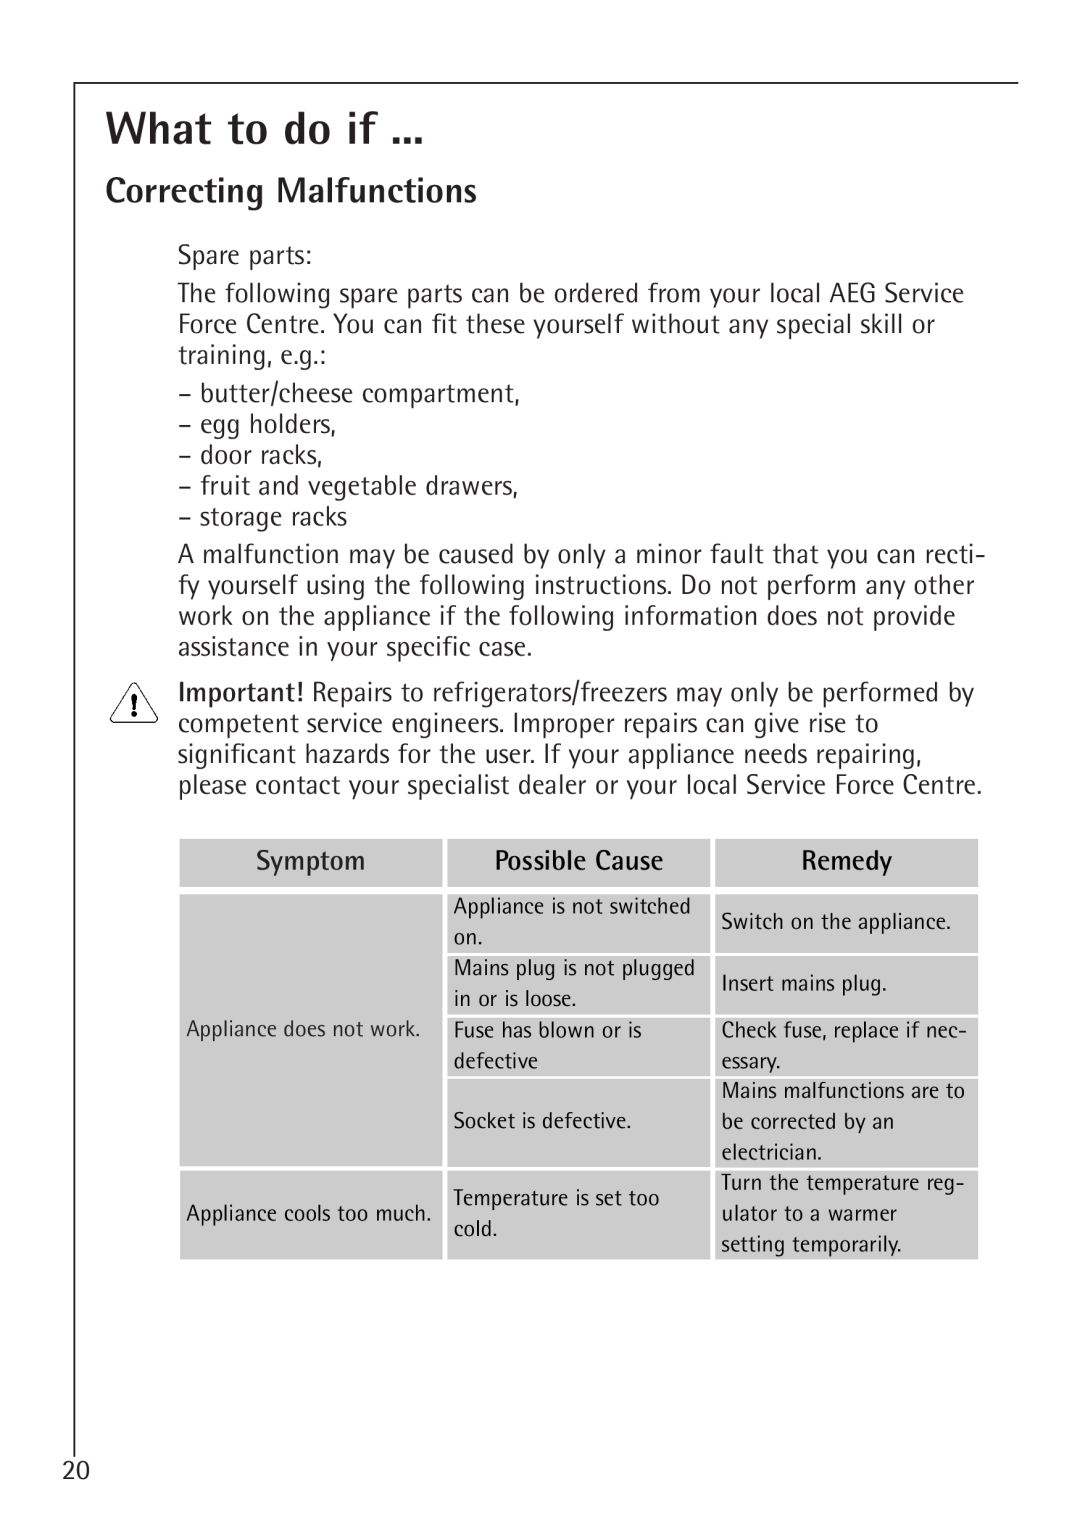 AEG 1450-7 TK manual What to do if, Correcting Malfunctions, Symptom, Possible Cause, Remedy 